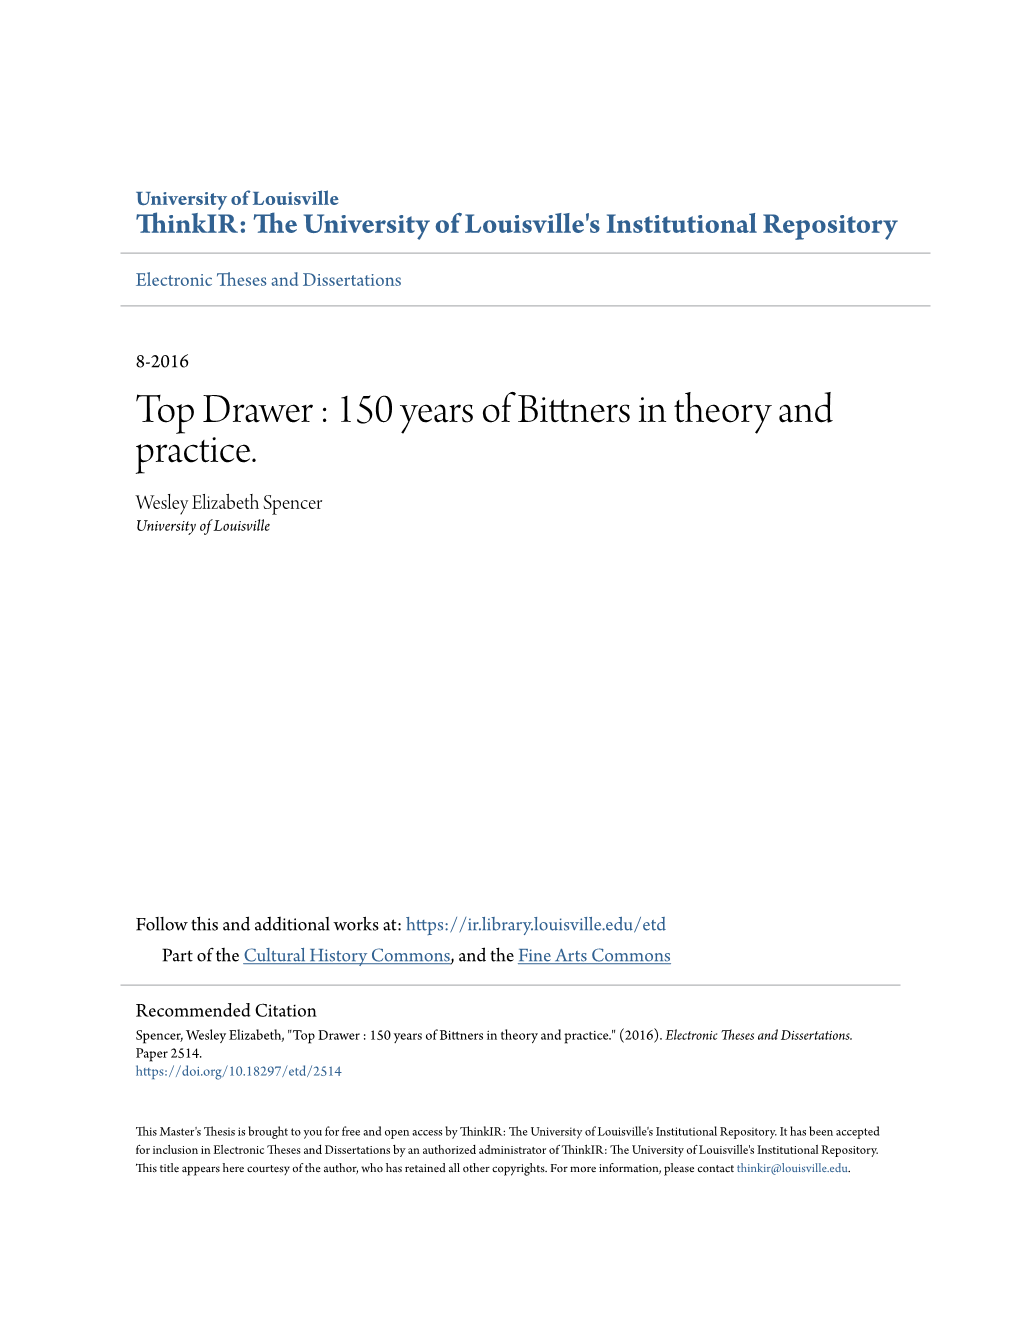 Top Drawer : 150 Years of Bittners in Theory and Practice. Wesley Elizabeth Spencer University of Louisville